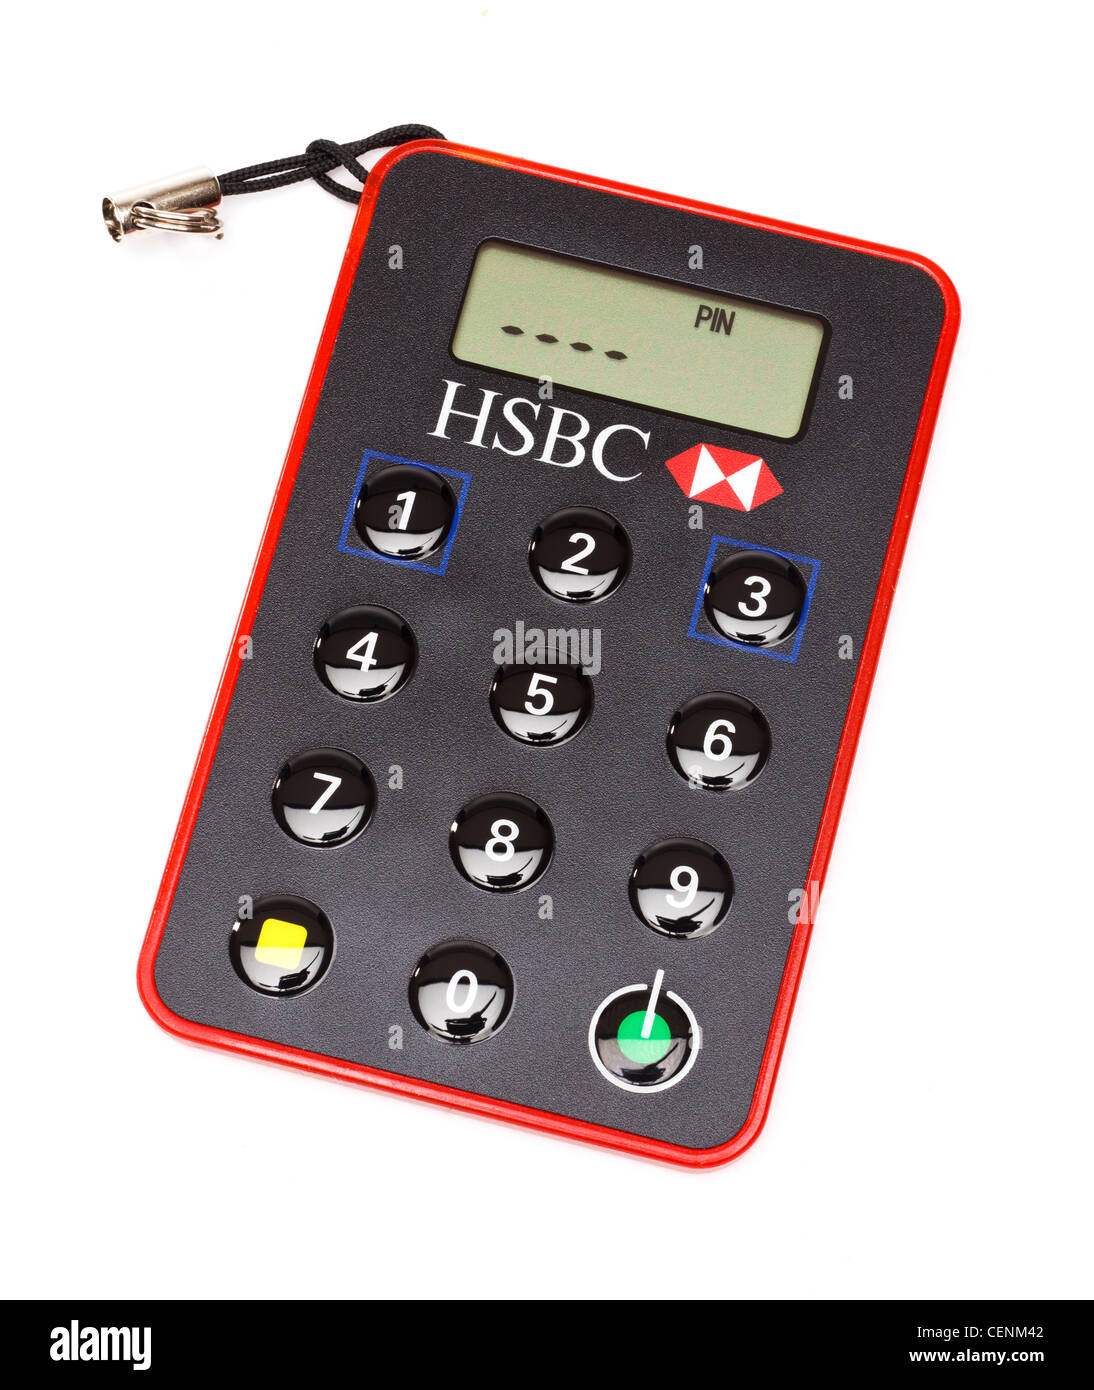 HSBC online banking security device with PIN screen showing Stock Photo